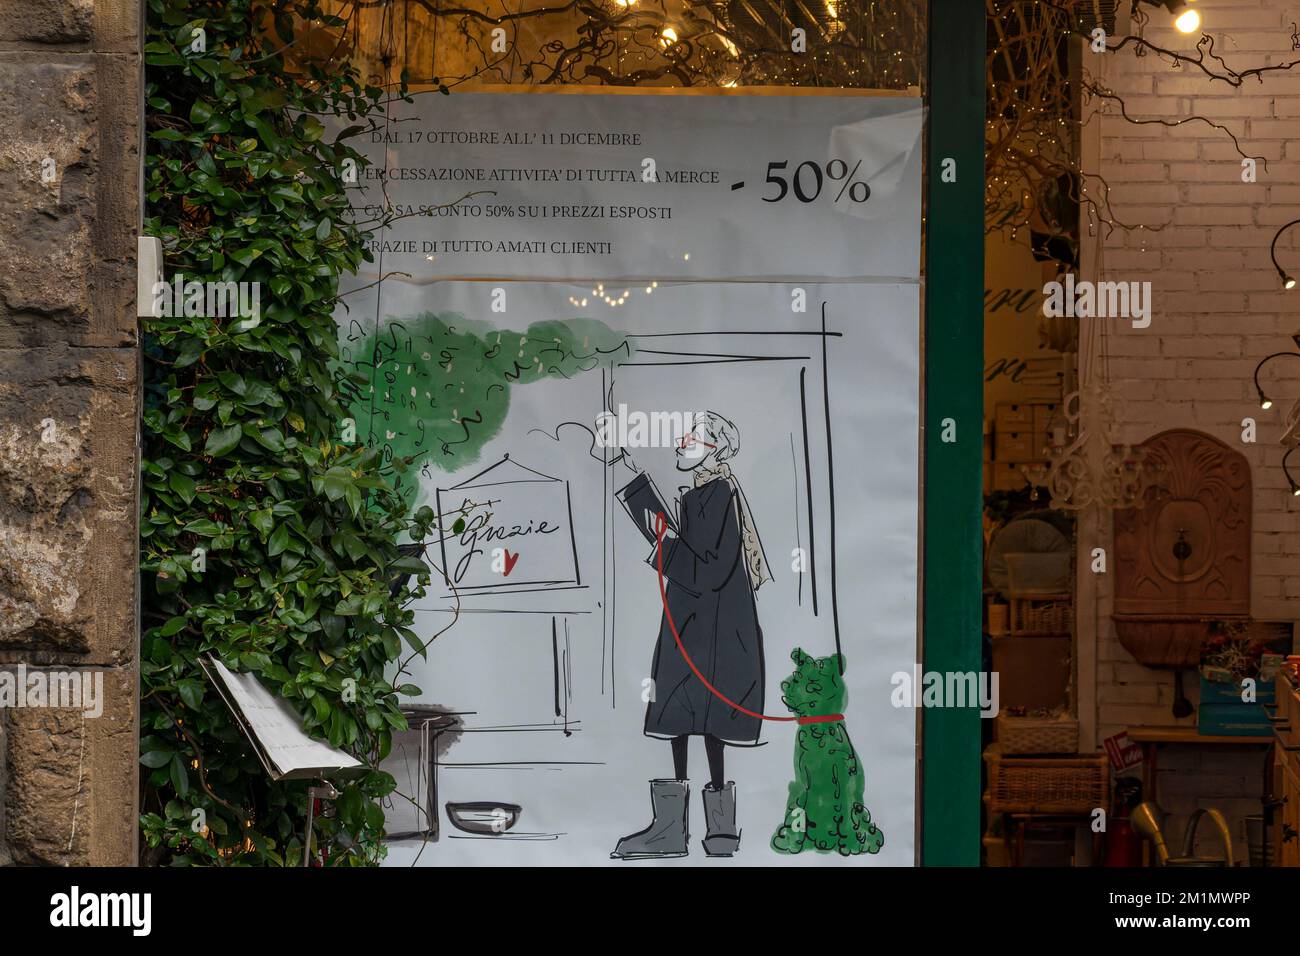 Advert on shop front in Florence Italy Stock Photo